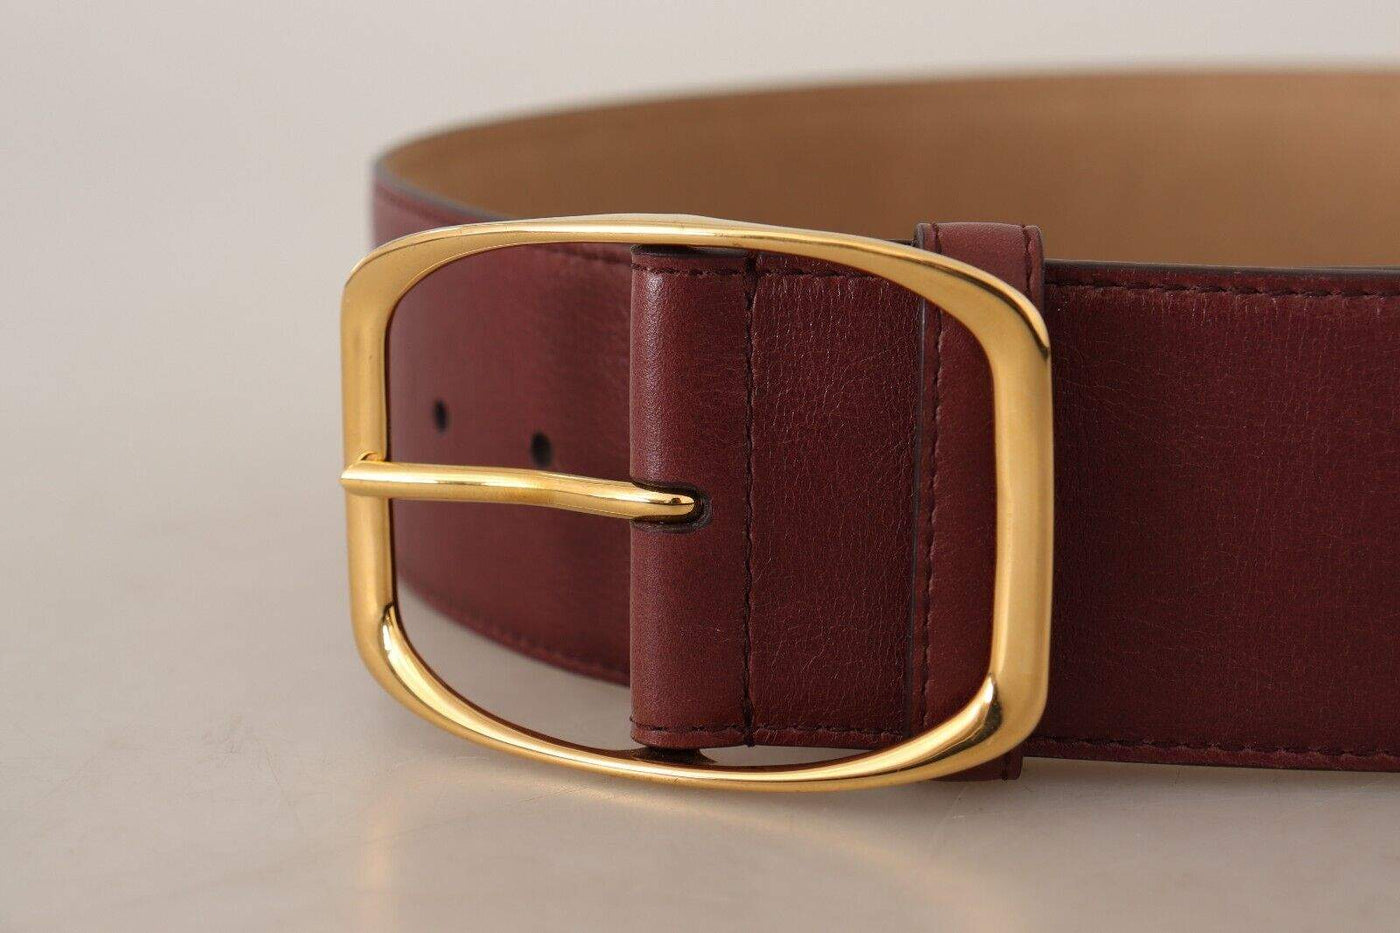 Dolce & Gabbana Maroon Leather Gold Metal Square Buckle Belt 75 cm / 30 Inches, Belts - Women - Accessories, Dolce & Gabbana, feed-1, Marrone at SEYMAYKA